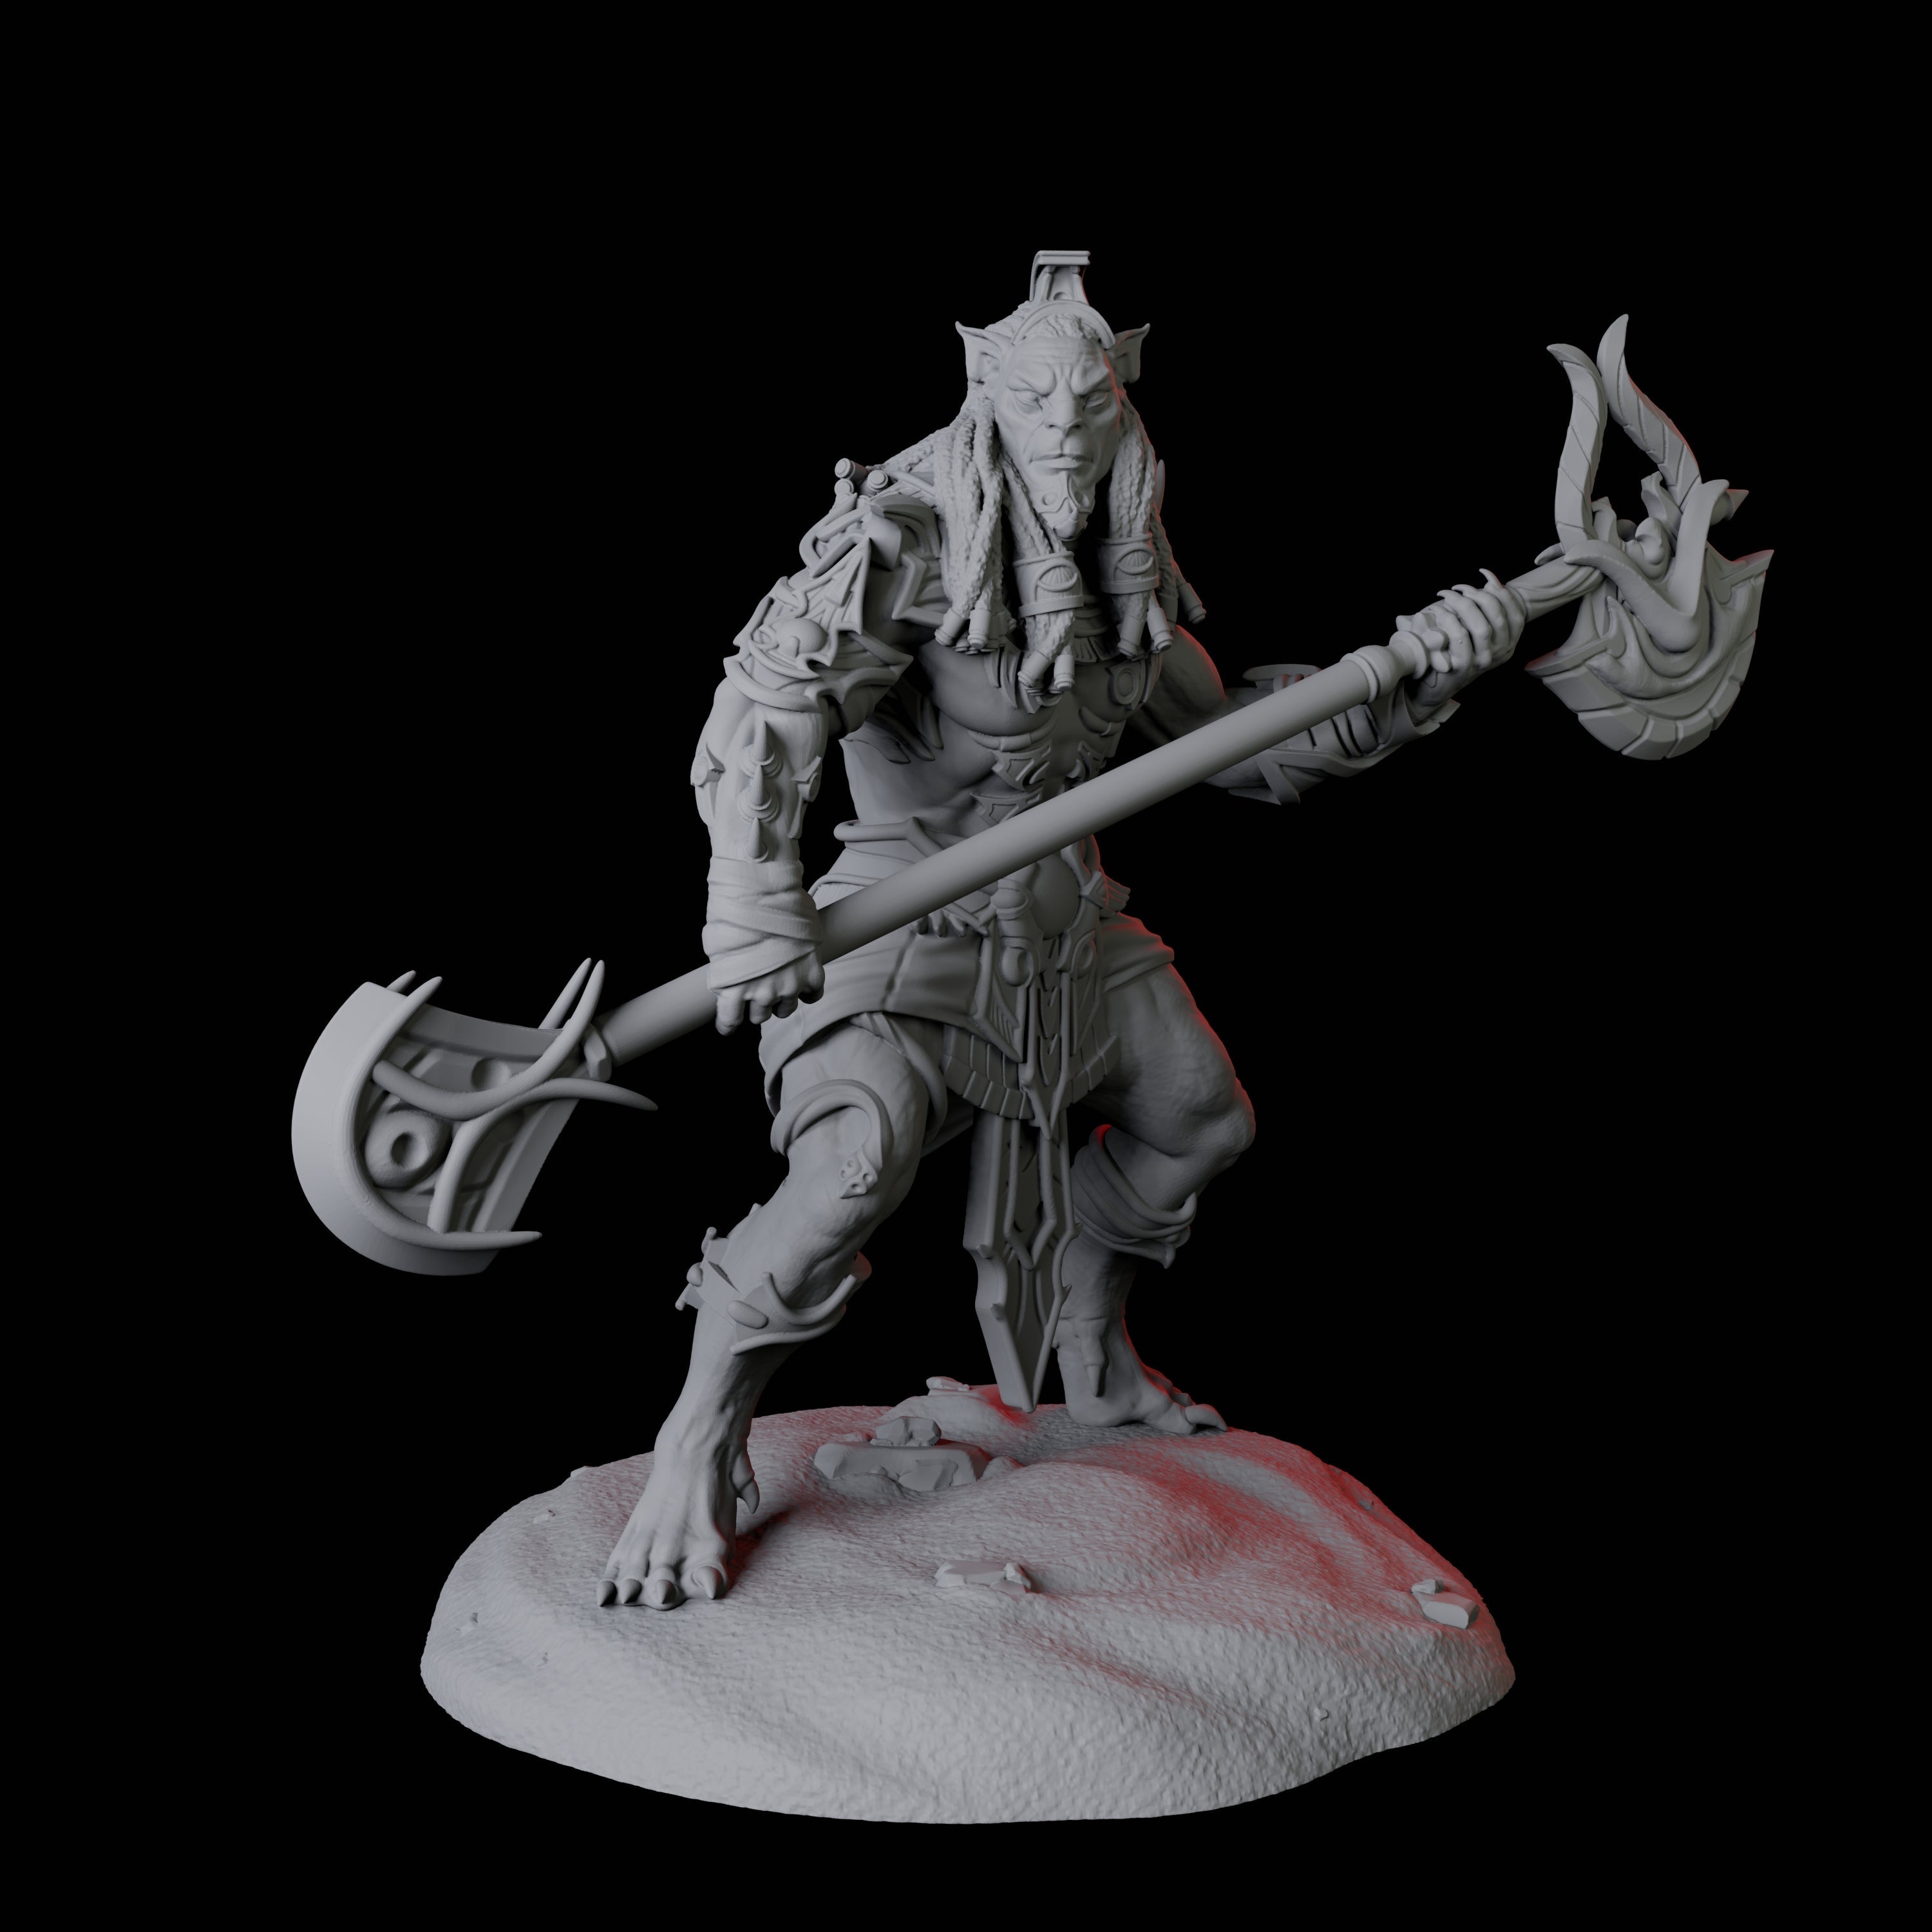 Powerful Tabaxi Warrior C Miniature for Dungeons and Dragons, Pathfinder or other TTRPGs